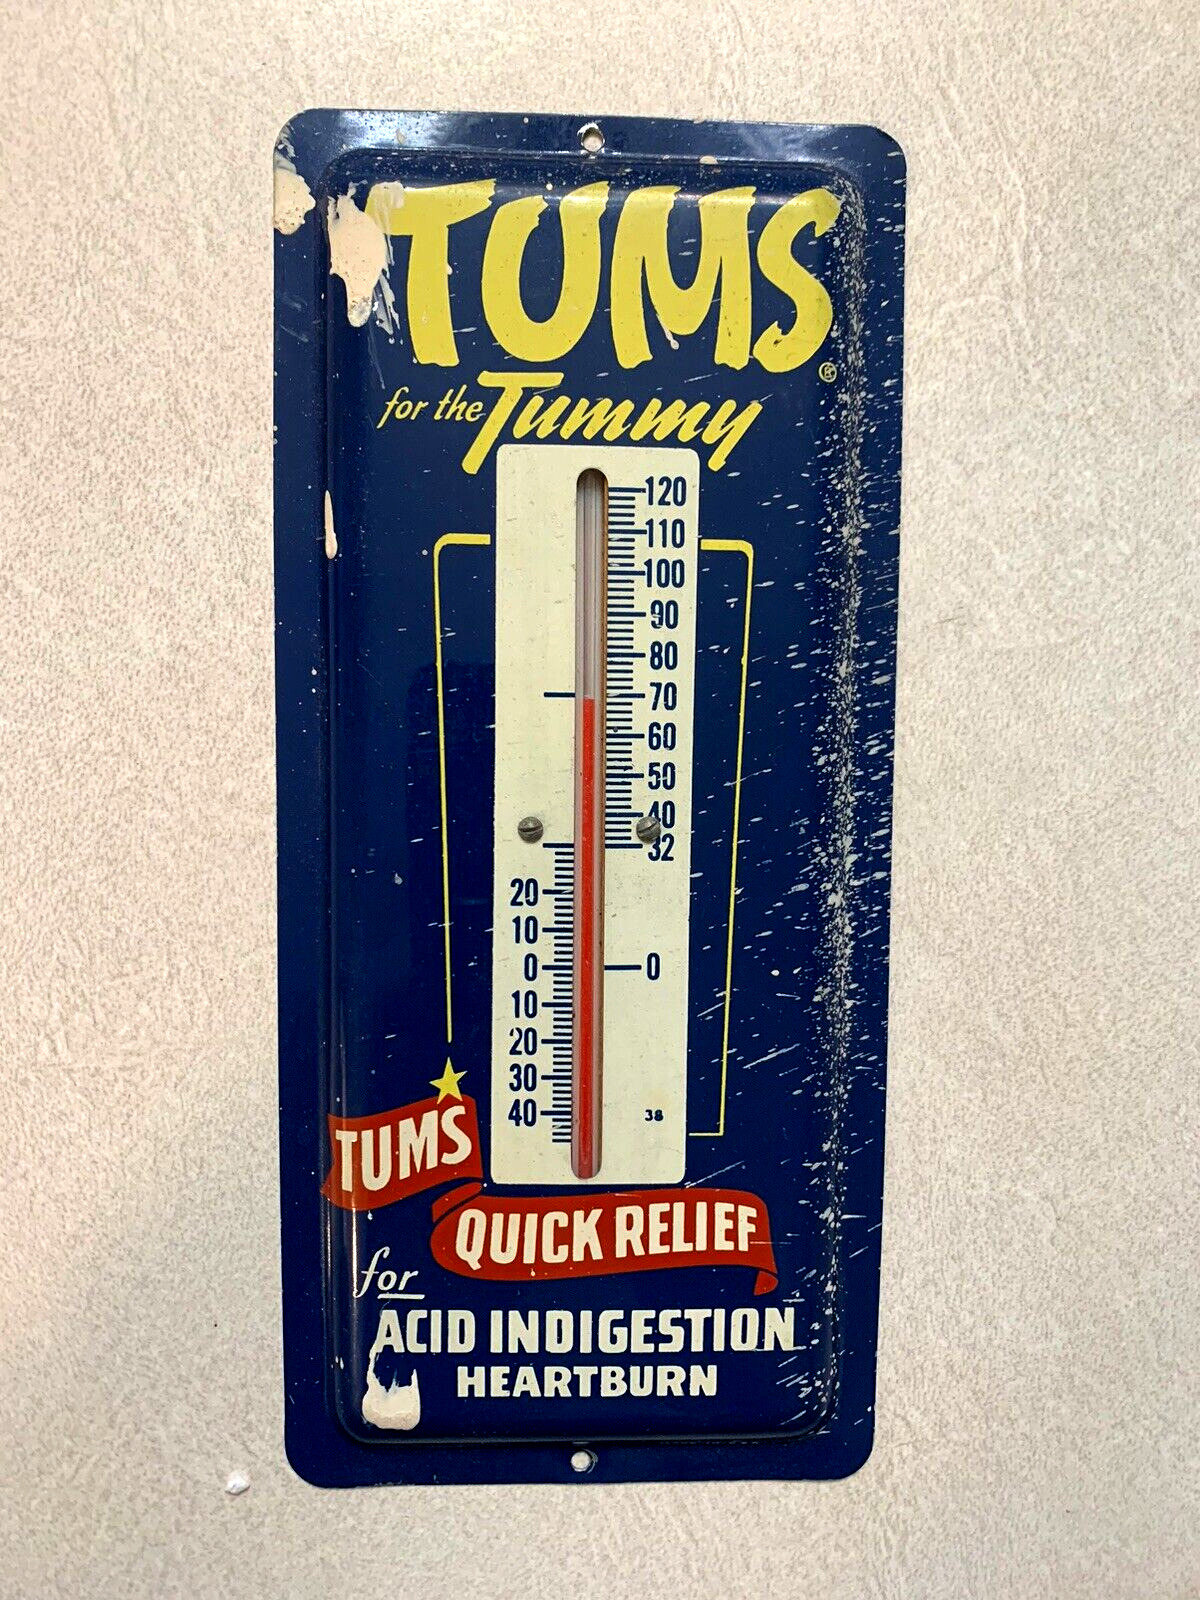 Vintage 1960's Tums Metal Advertising Thermometer Sign Pharmacy Quick Relief